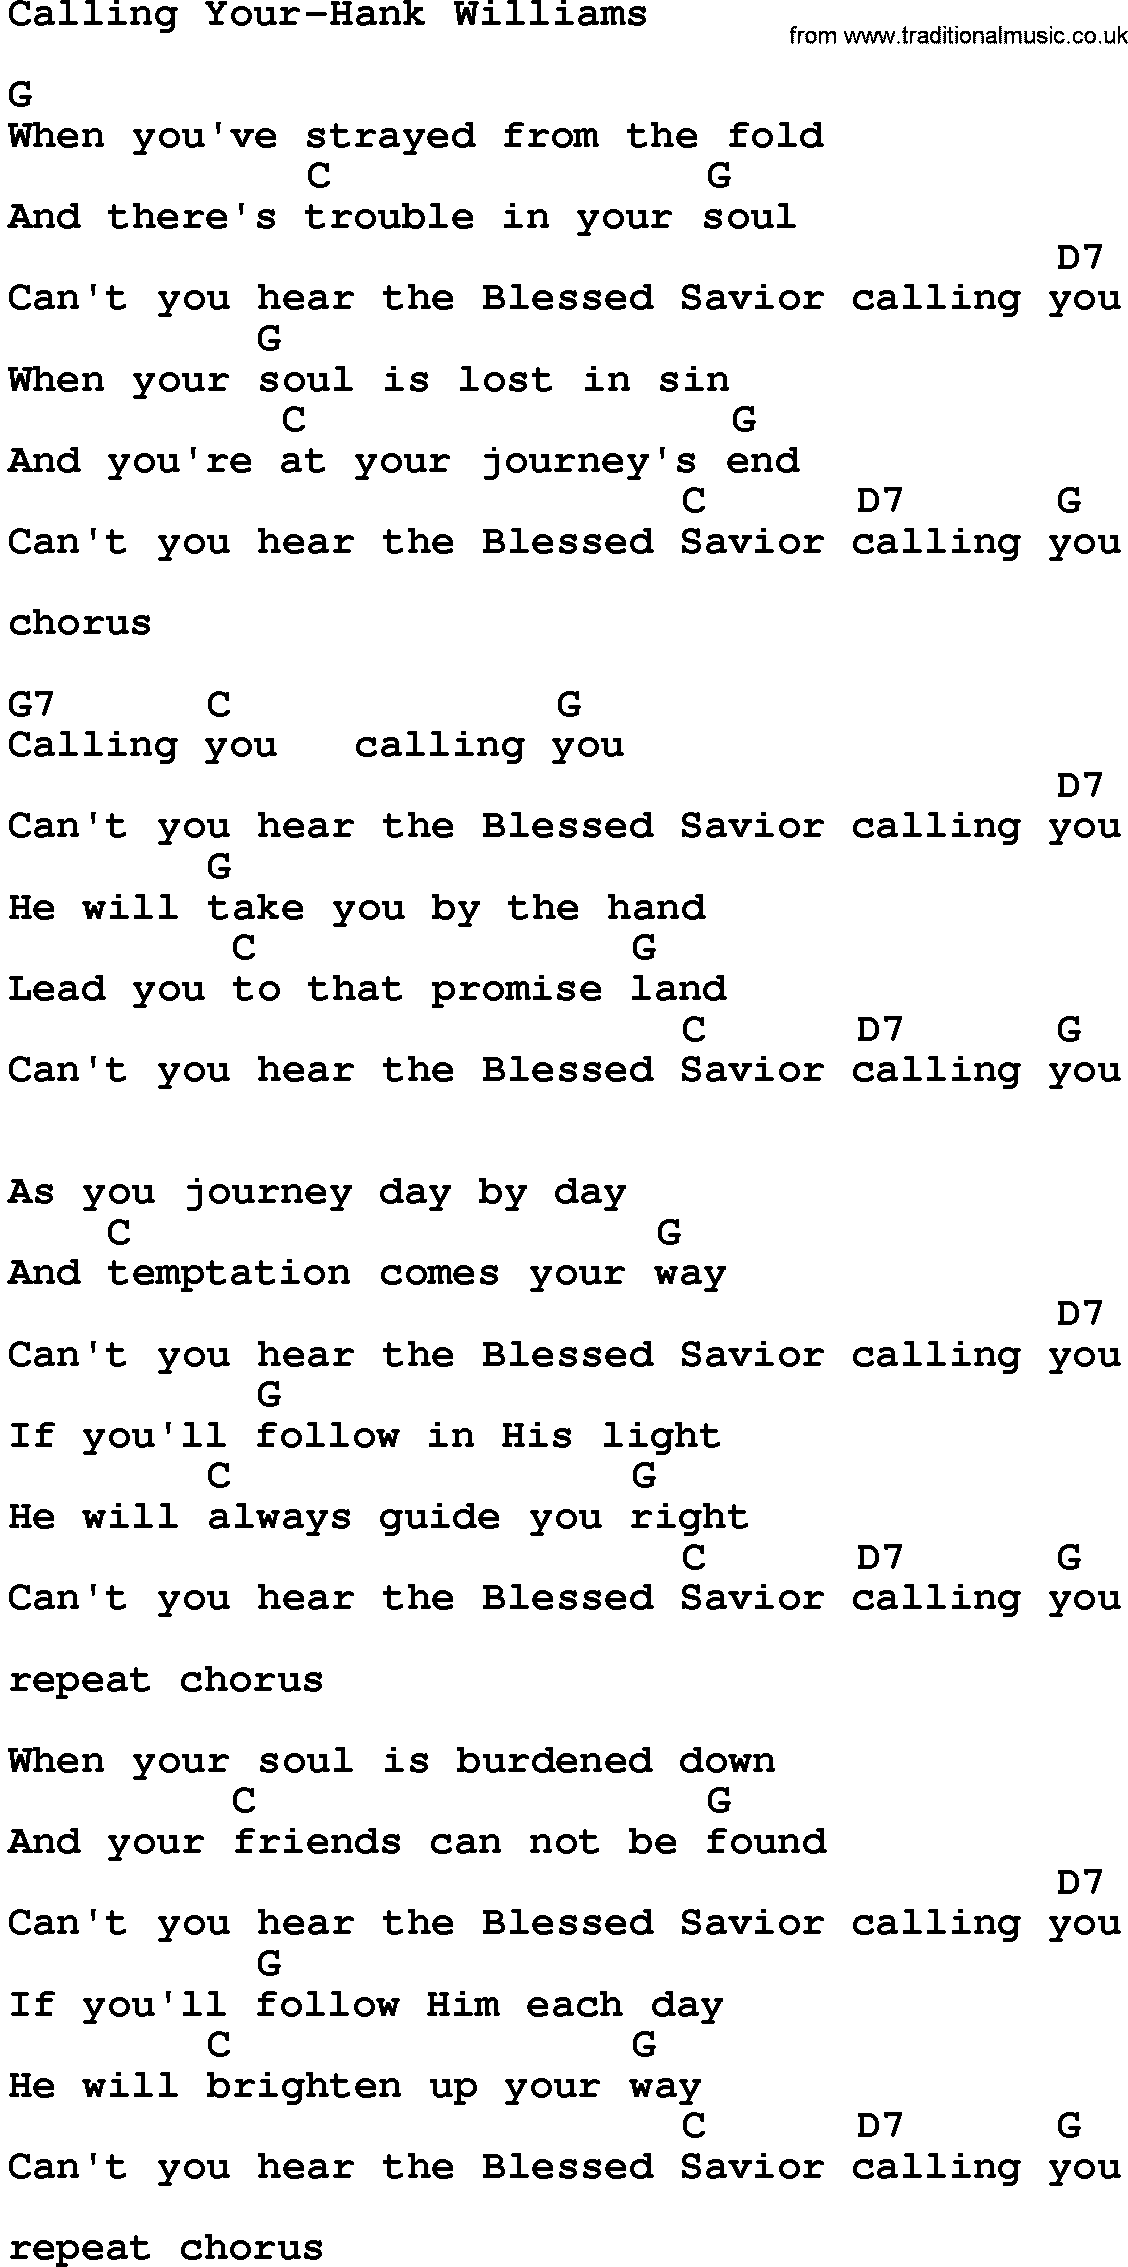 Country music song: Calling Your-Hank Williams lyrics and chords